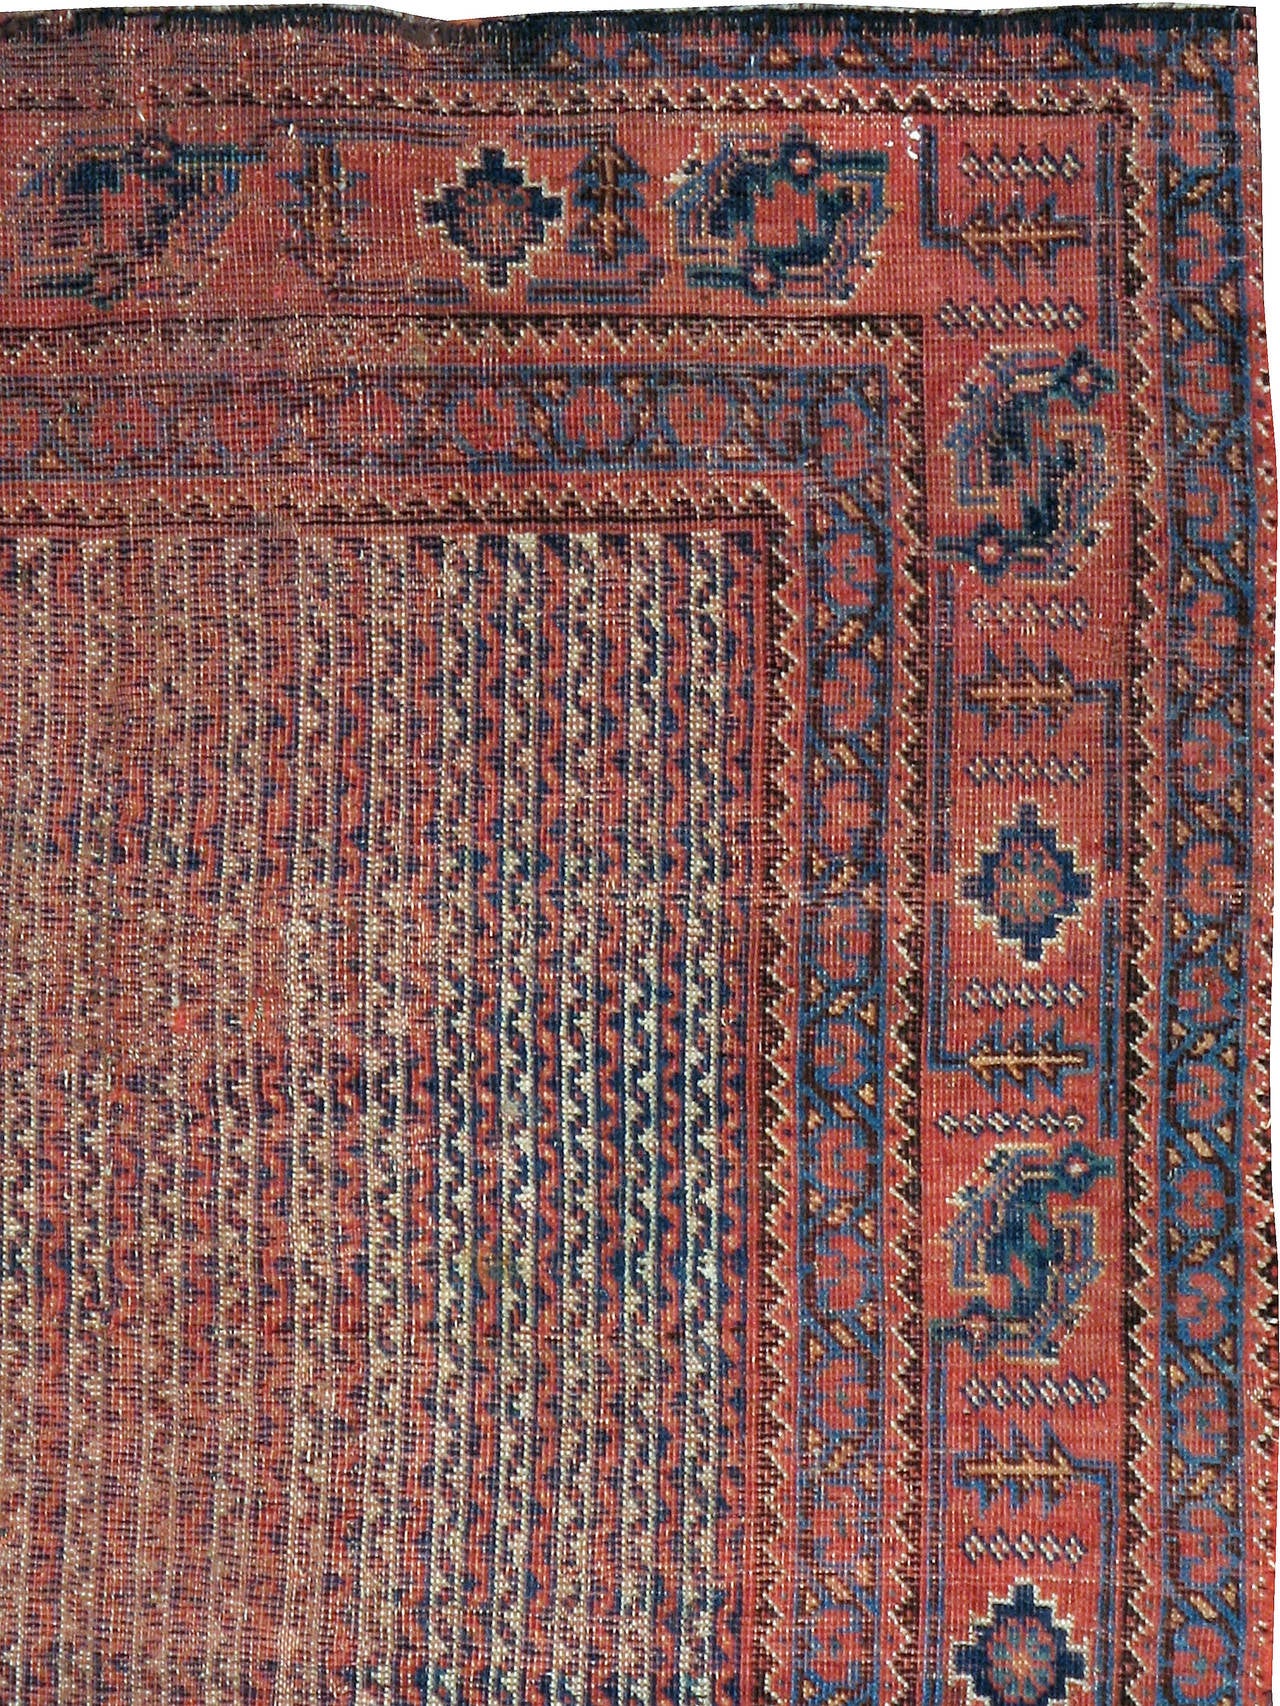 A weathered and distressed antique Persian Afshar carpet from the turn of the 20th century.